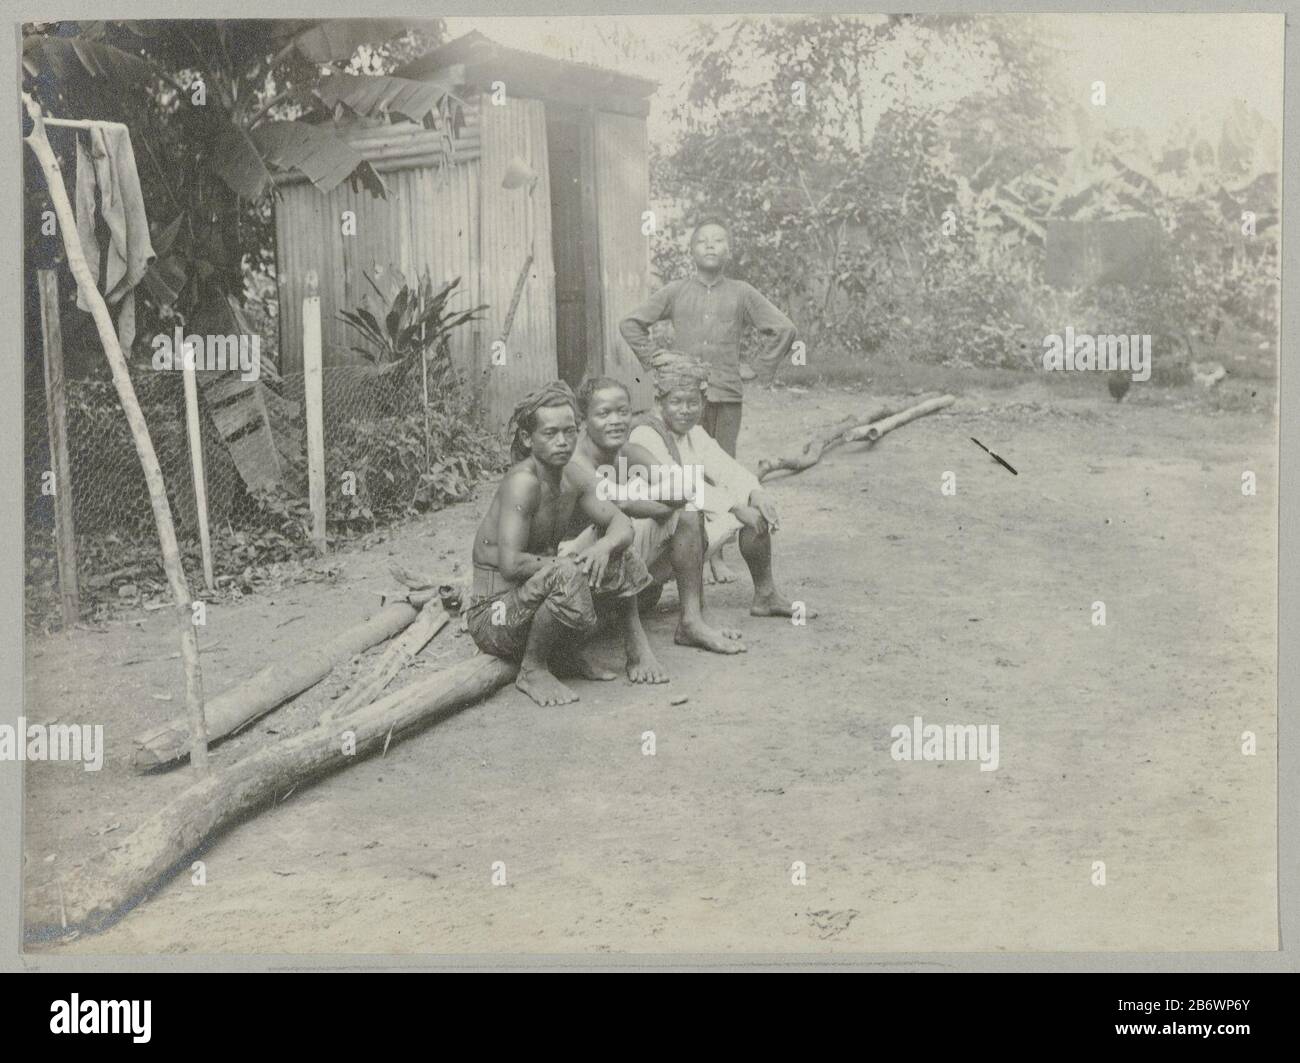 Javanen (titel op object) Four Javanese contract workers. Part of the album Souvenir de Voyage (Part 5), about the life of the Doijer family in and around the plantation Ma Retraite in Suriname during the years 1906-1913. Manufacturer : Photographer: Hendrik Doijer (attributed to) Place manufacture: Suriname Date: 1906 - 1913 Physical features: gelatin silver print material: paper Technique: gelatin silver print dimensions: photo: h 83 mm × W 111 mm Date: 1906 - 1913 Stock Photo